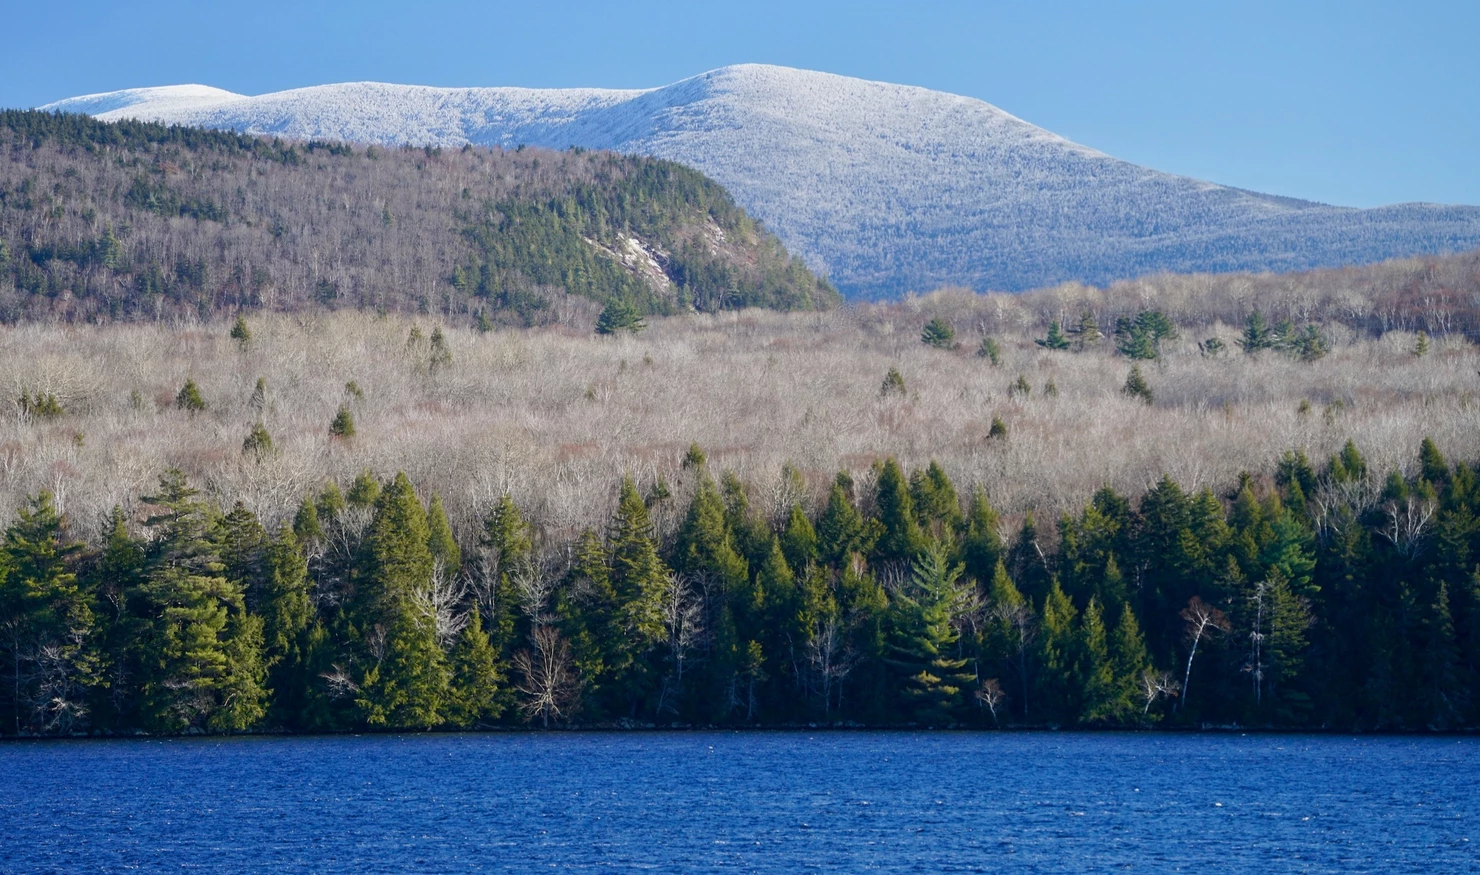 Majestic Mt. Moosilauke frames Webster Slide and Lake Tarleton. Logging is proposed within 100 feet of the lakeshore to within a short distance of the Appalachian Trail, which runs along the ridgeline in the background of the photo.